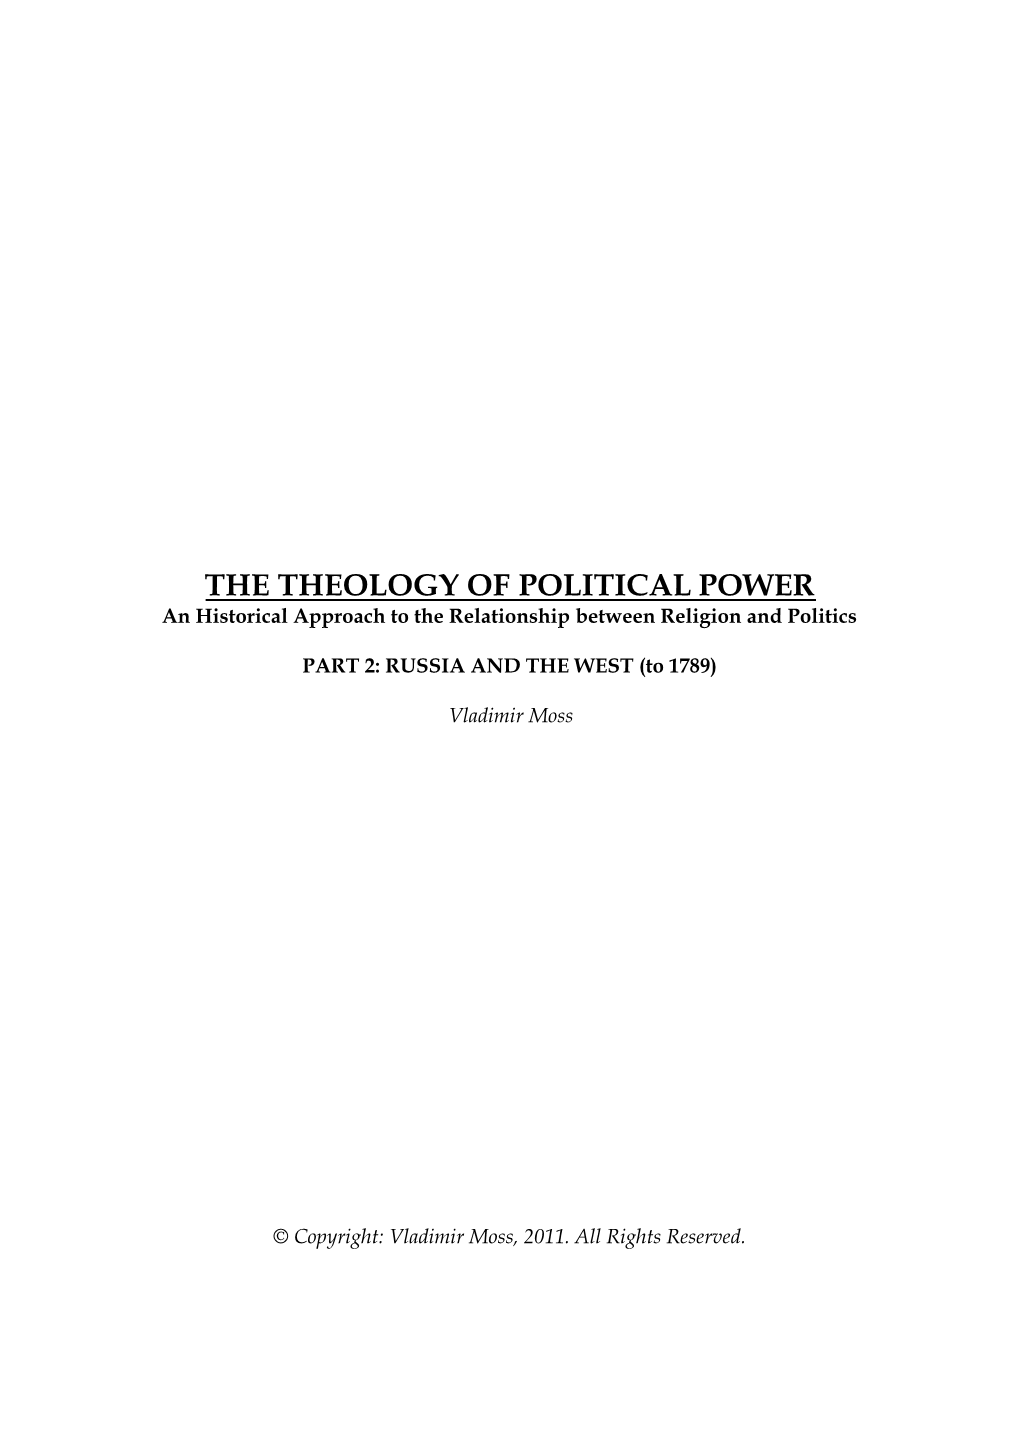 THE THEOLOGY of POLITICAL POWER an Historical Approach to the Relationship Between Religion and Politics